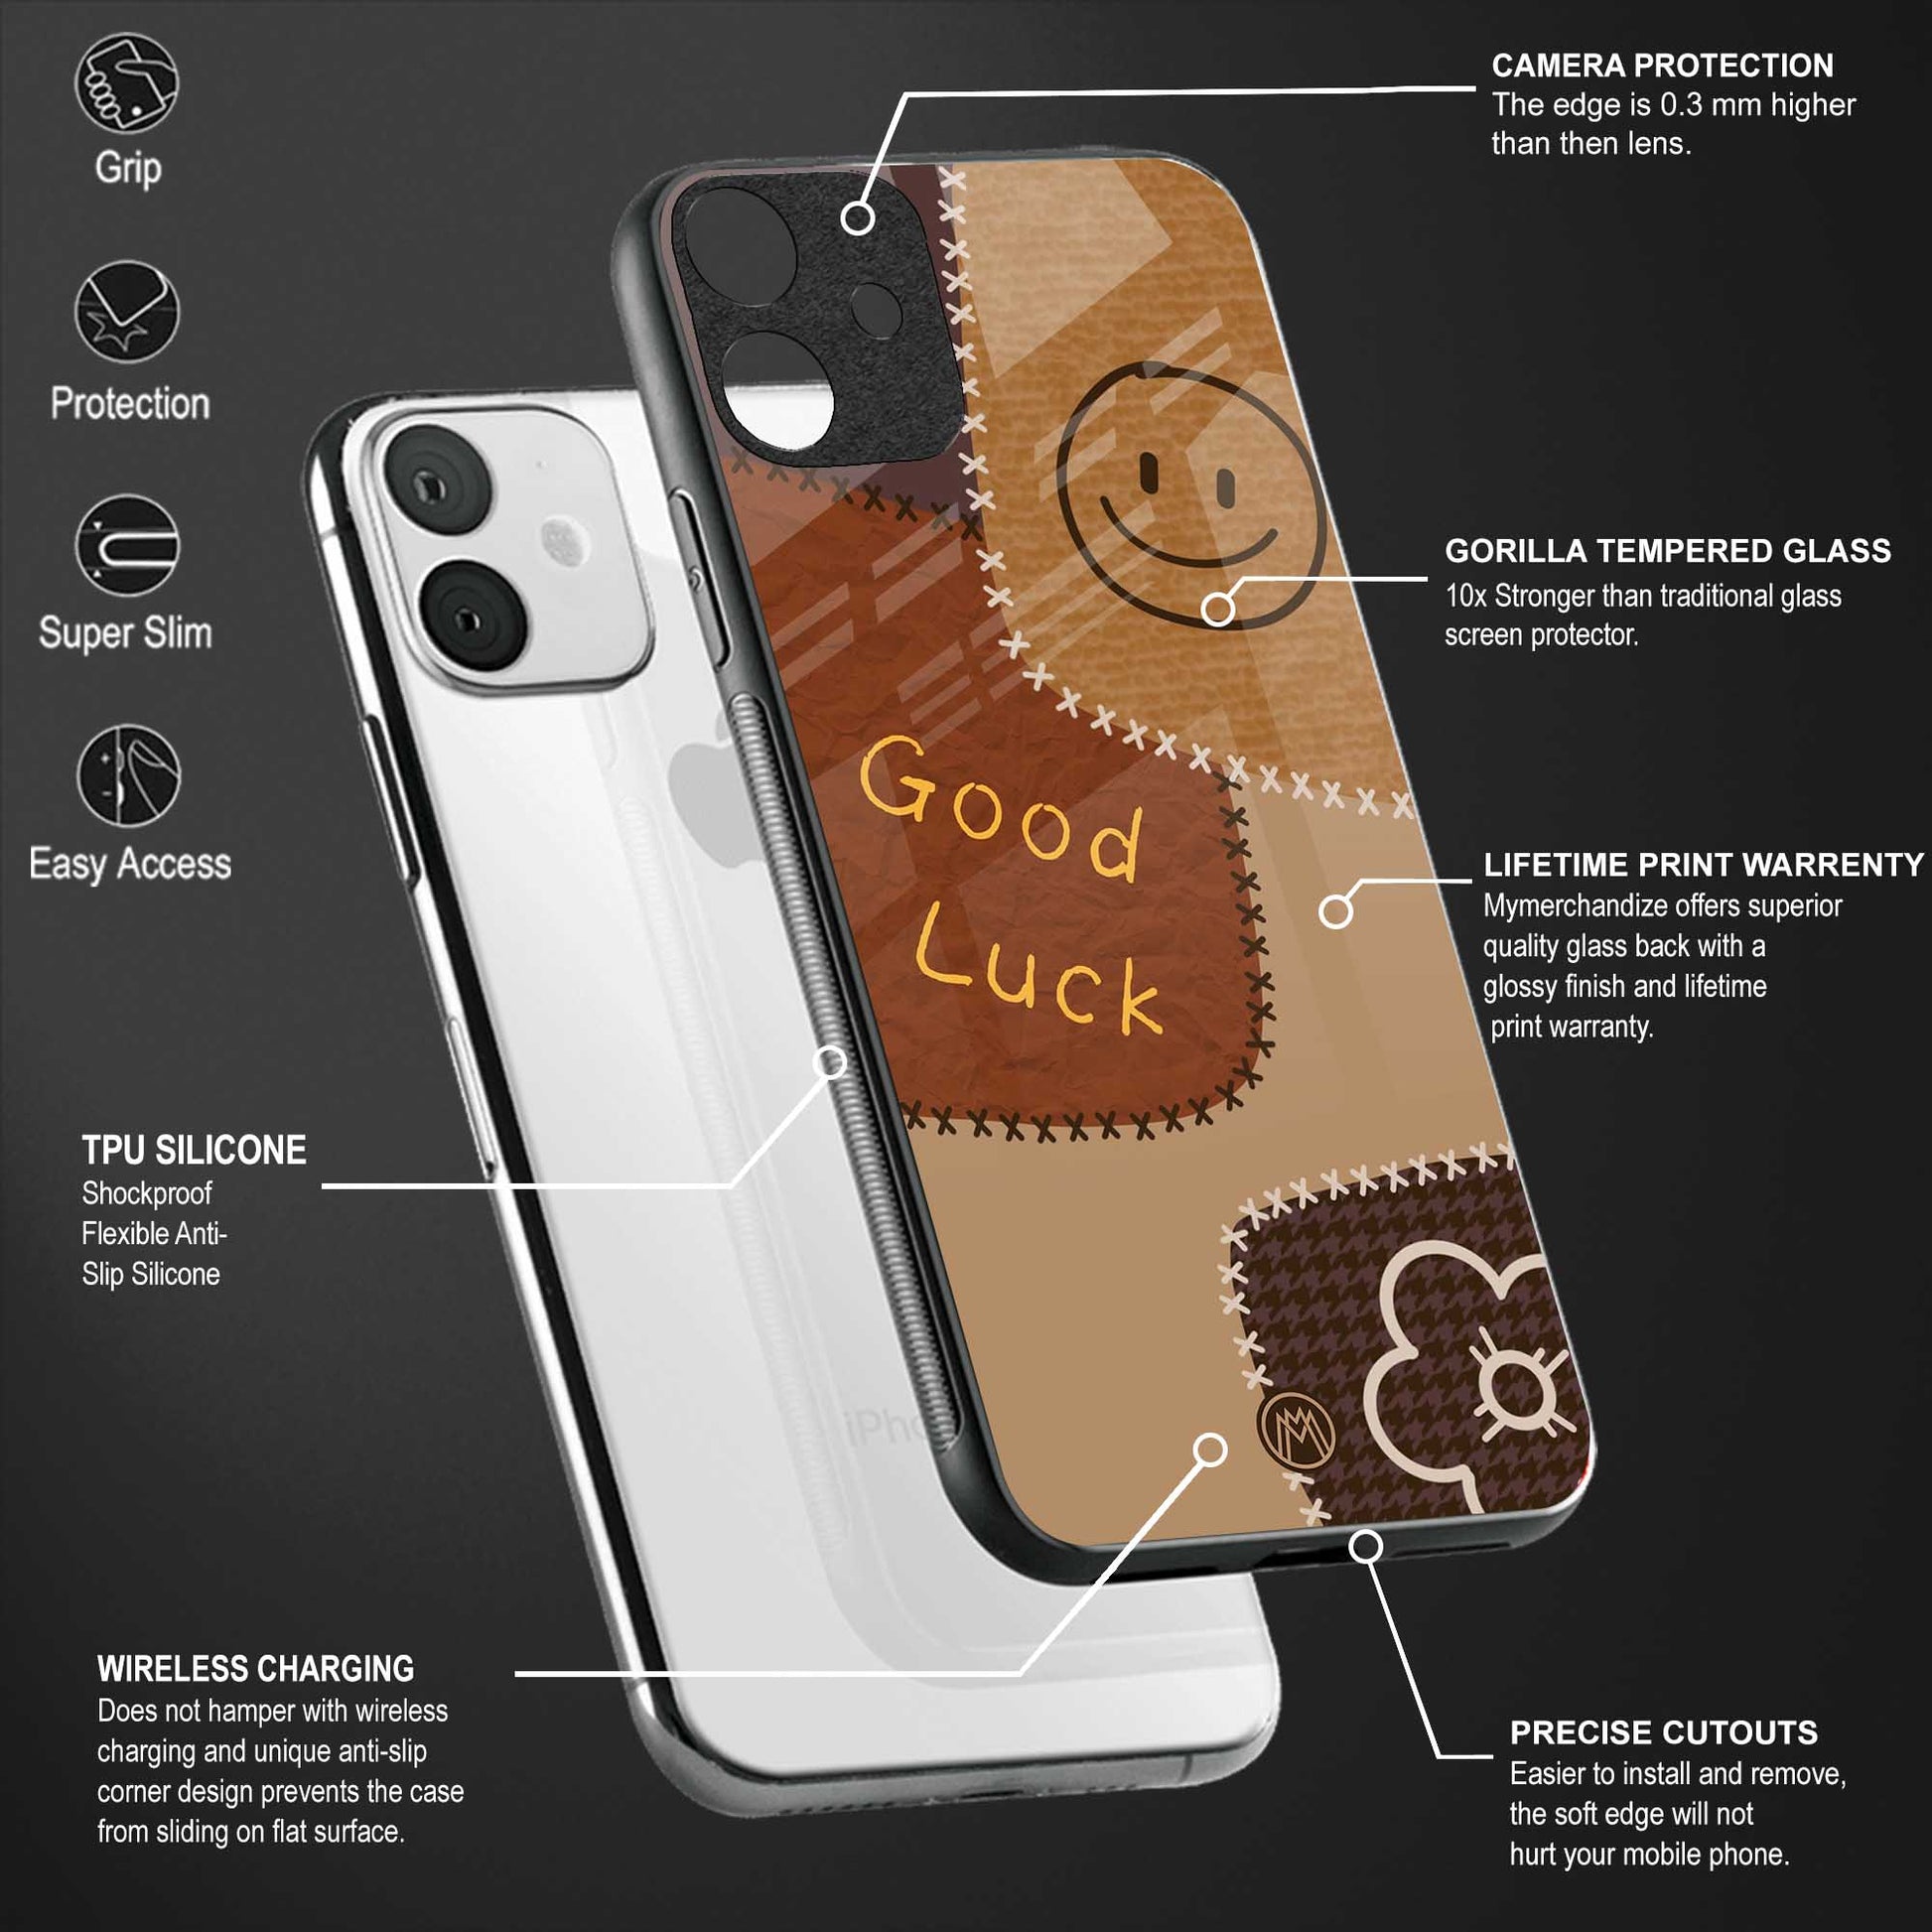 good luck back phone cover | glass case for oneplus nord ce 2 lite 5g